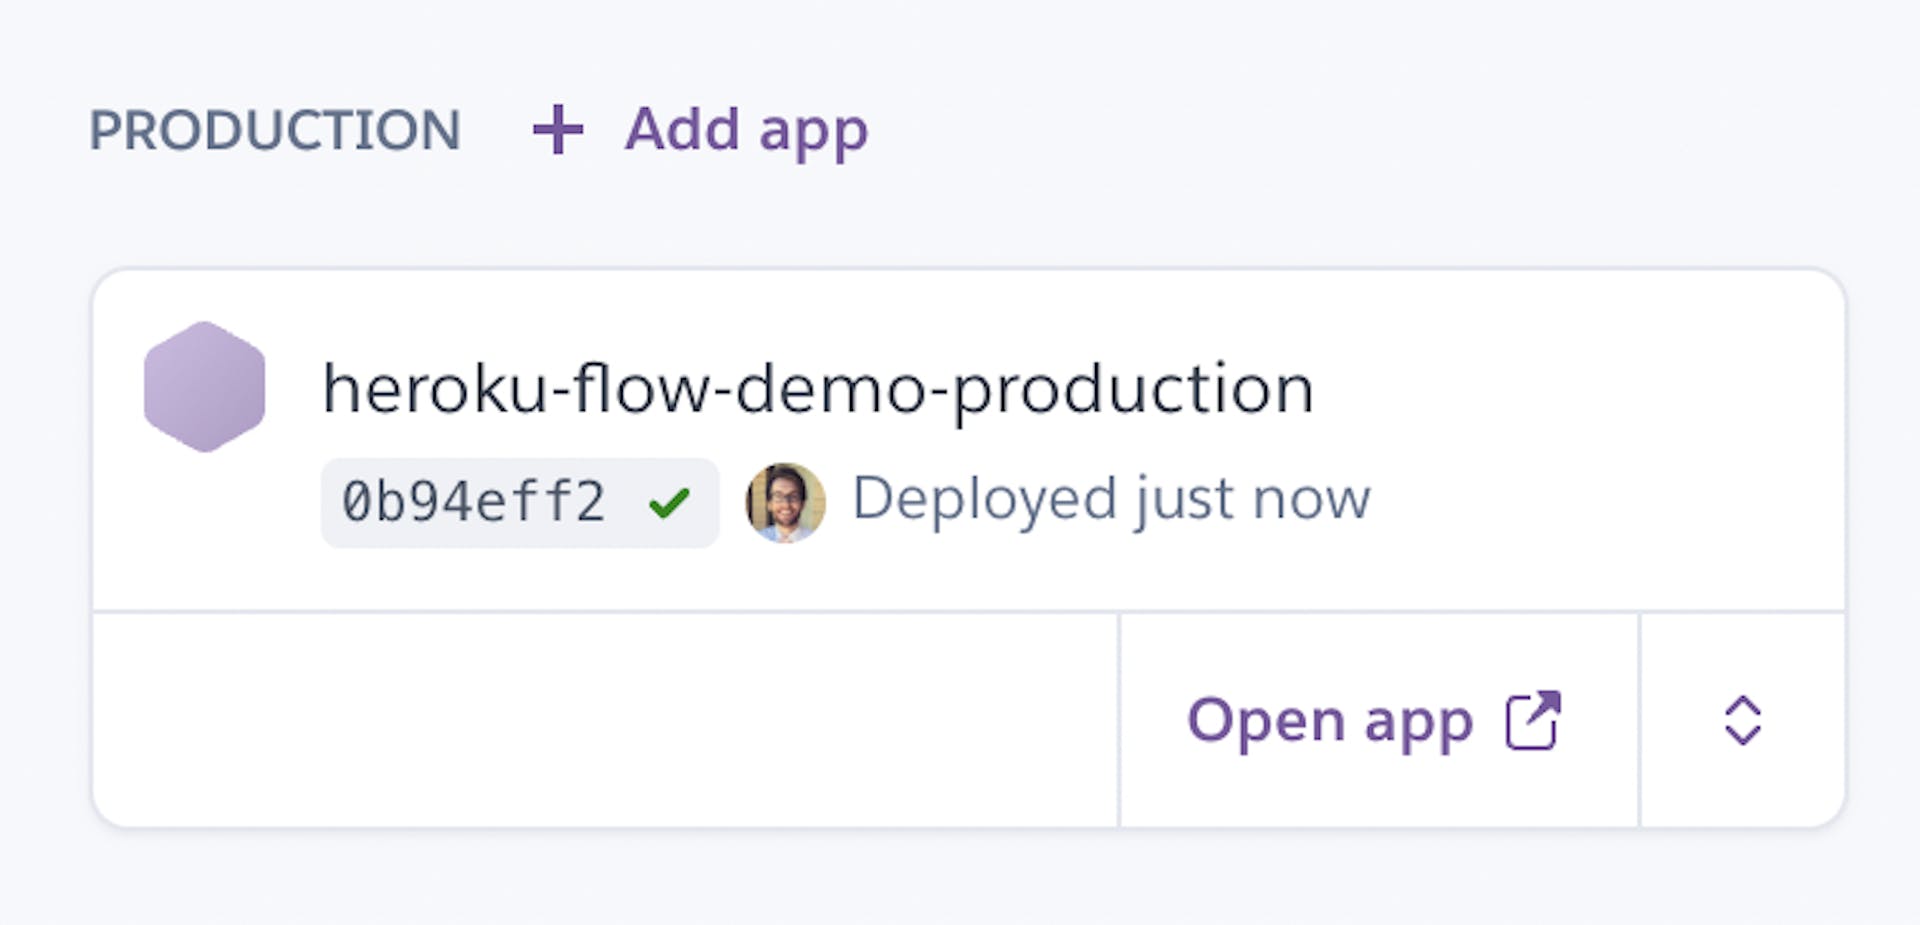 Production app was deployed